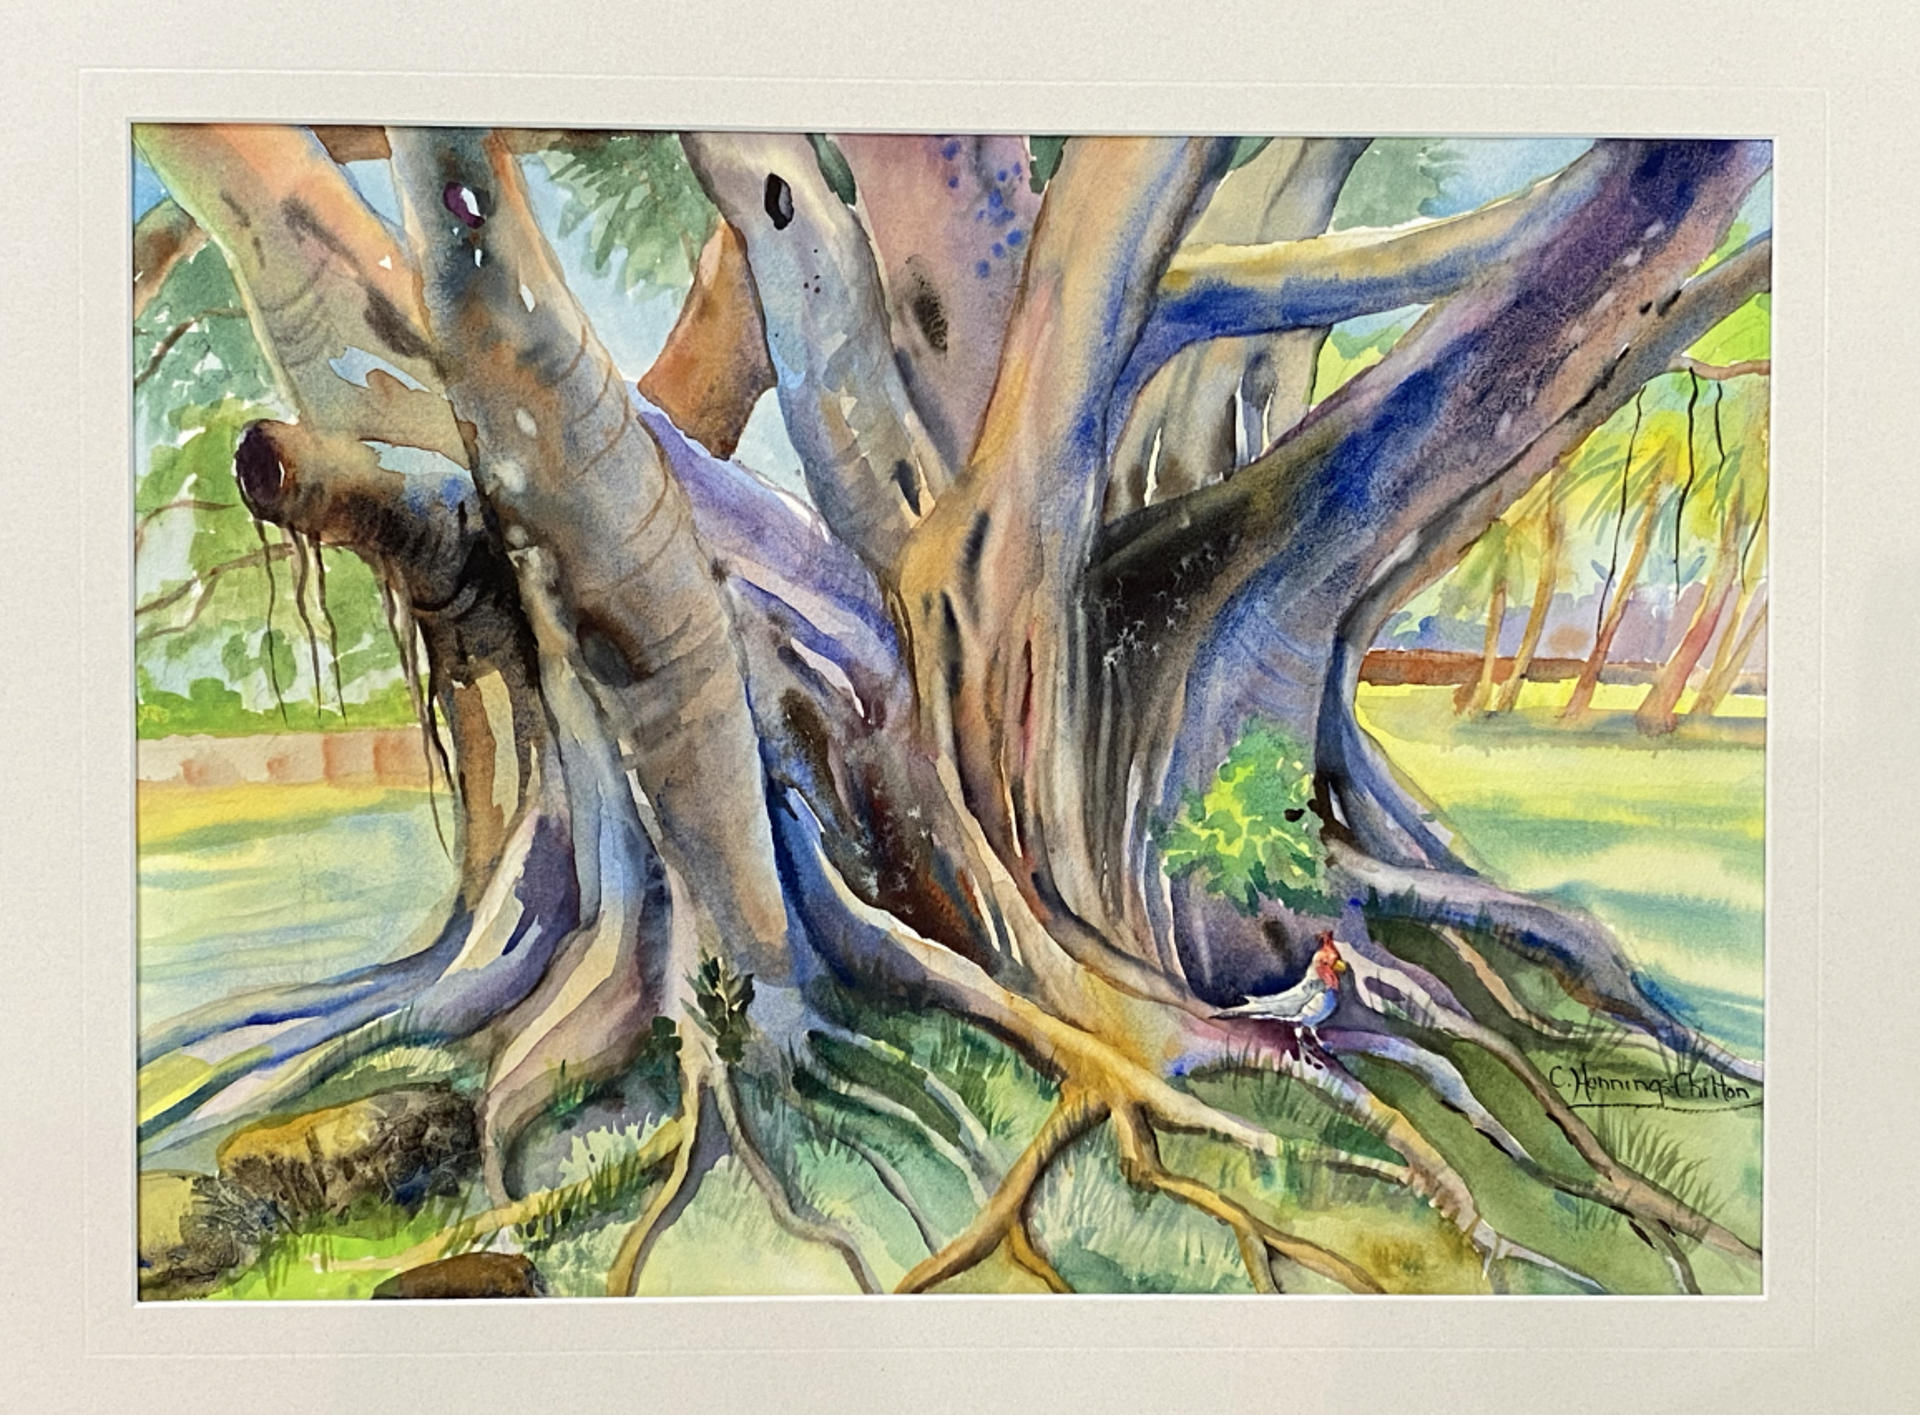 Banyan Tree and Bird by Connie Hennings-Chilton